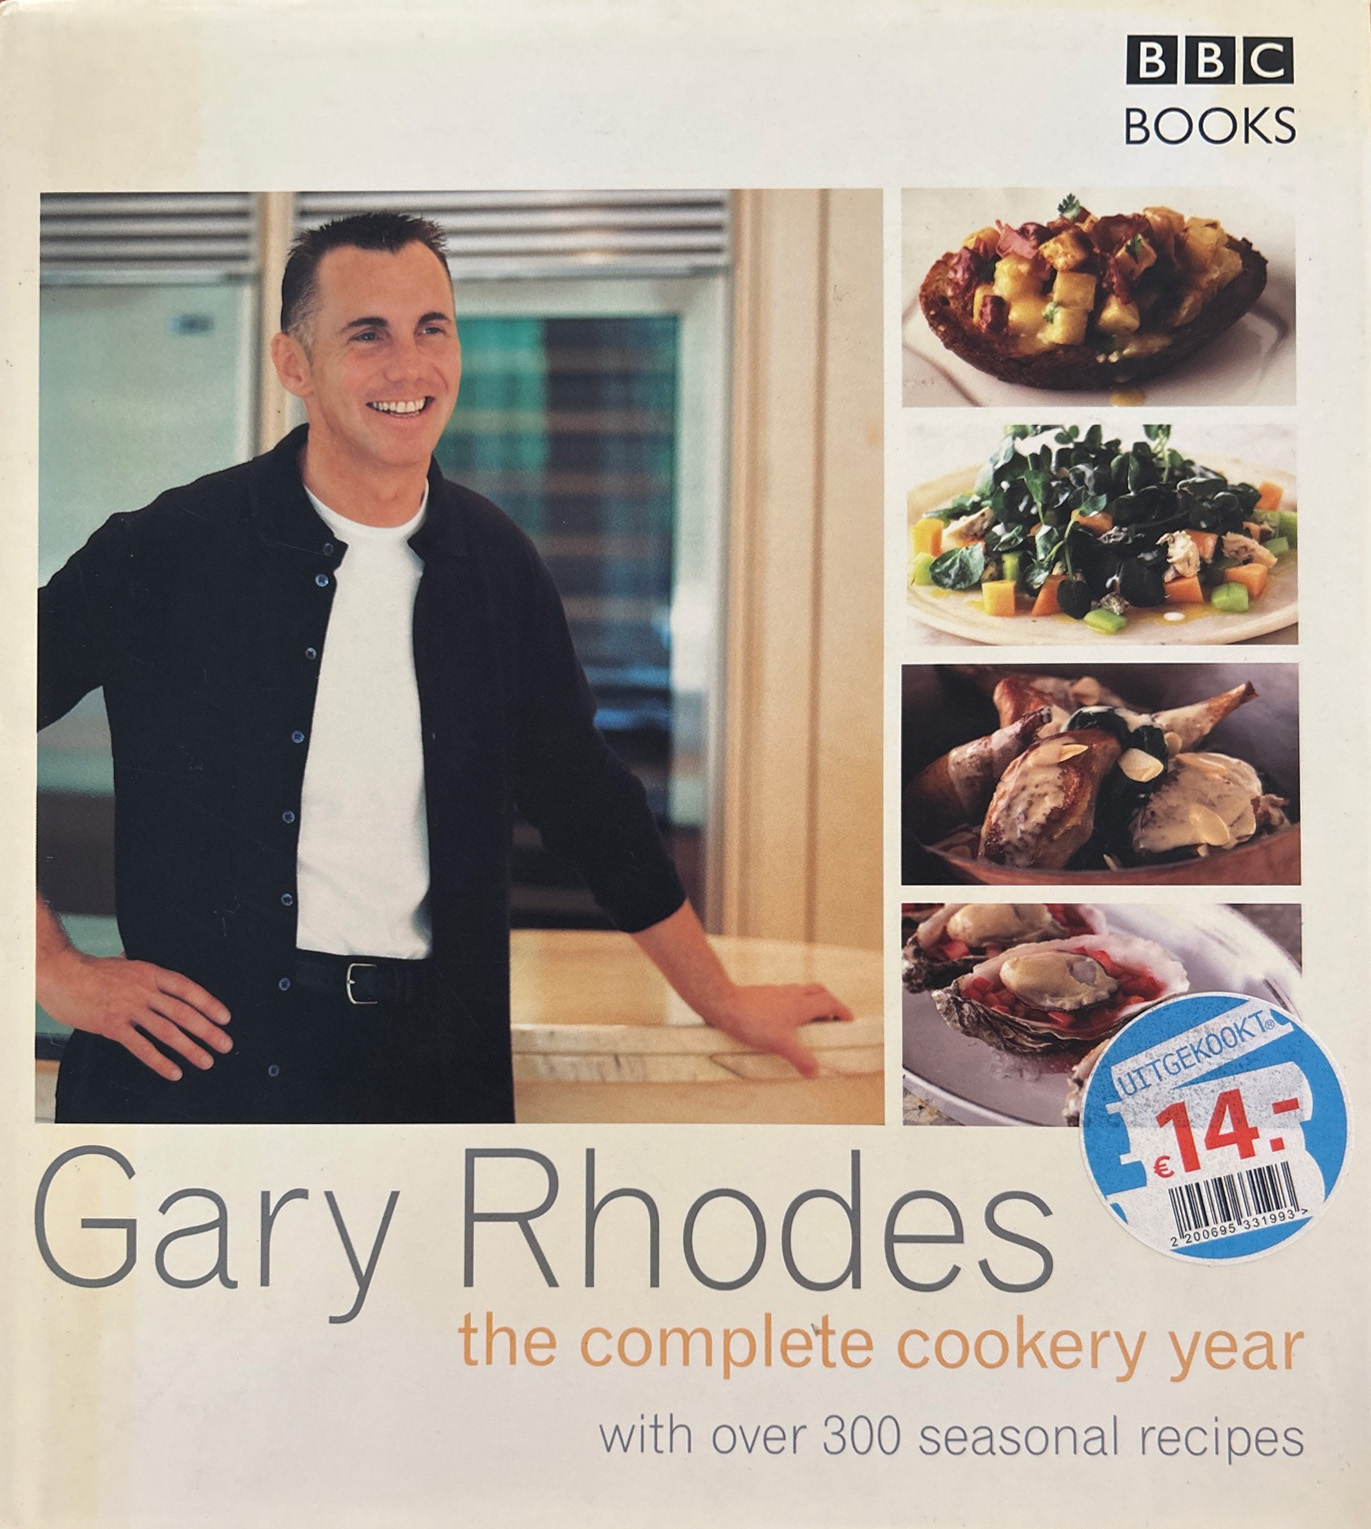 The complete cookery year – Gary Rhodes